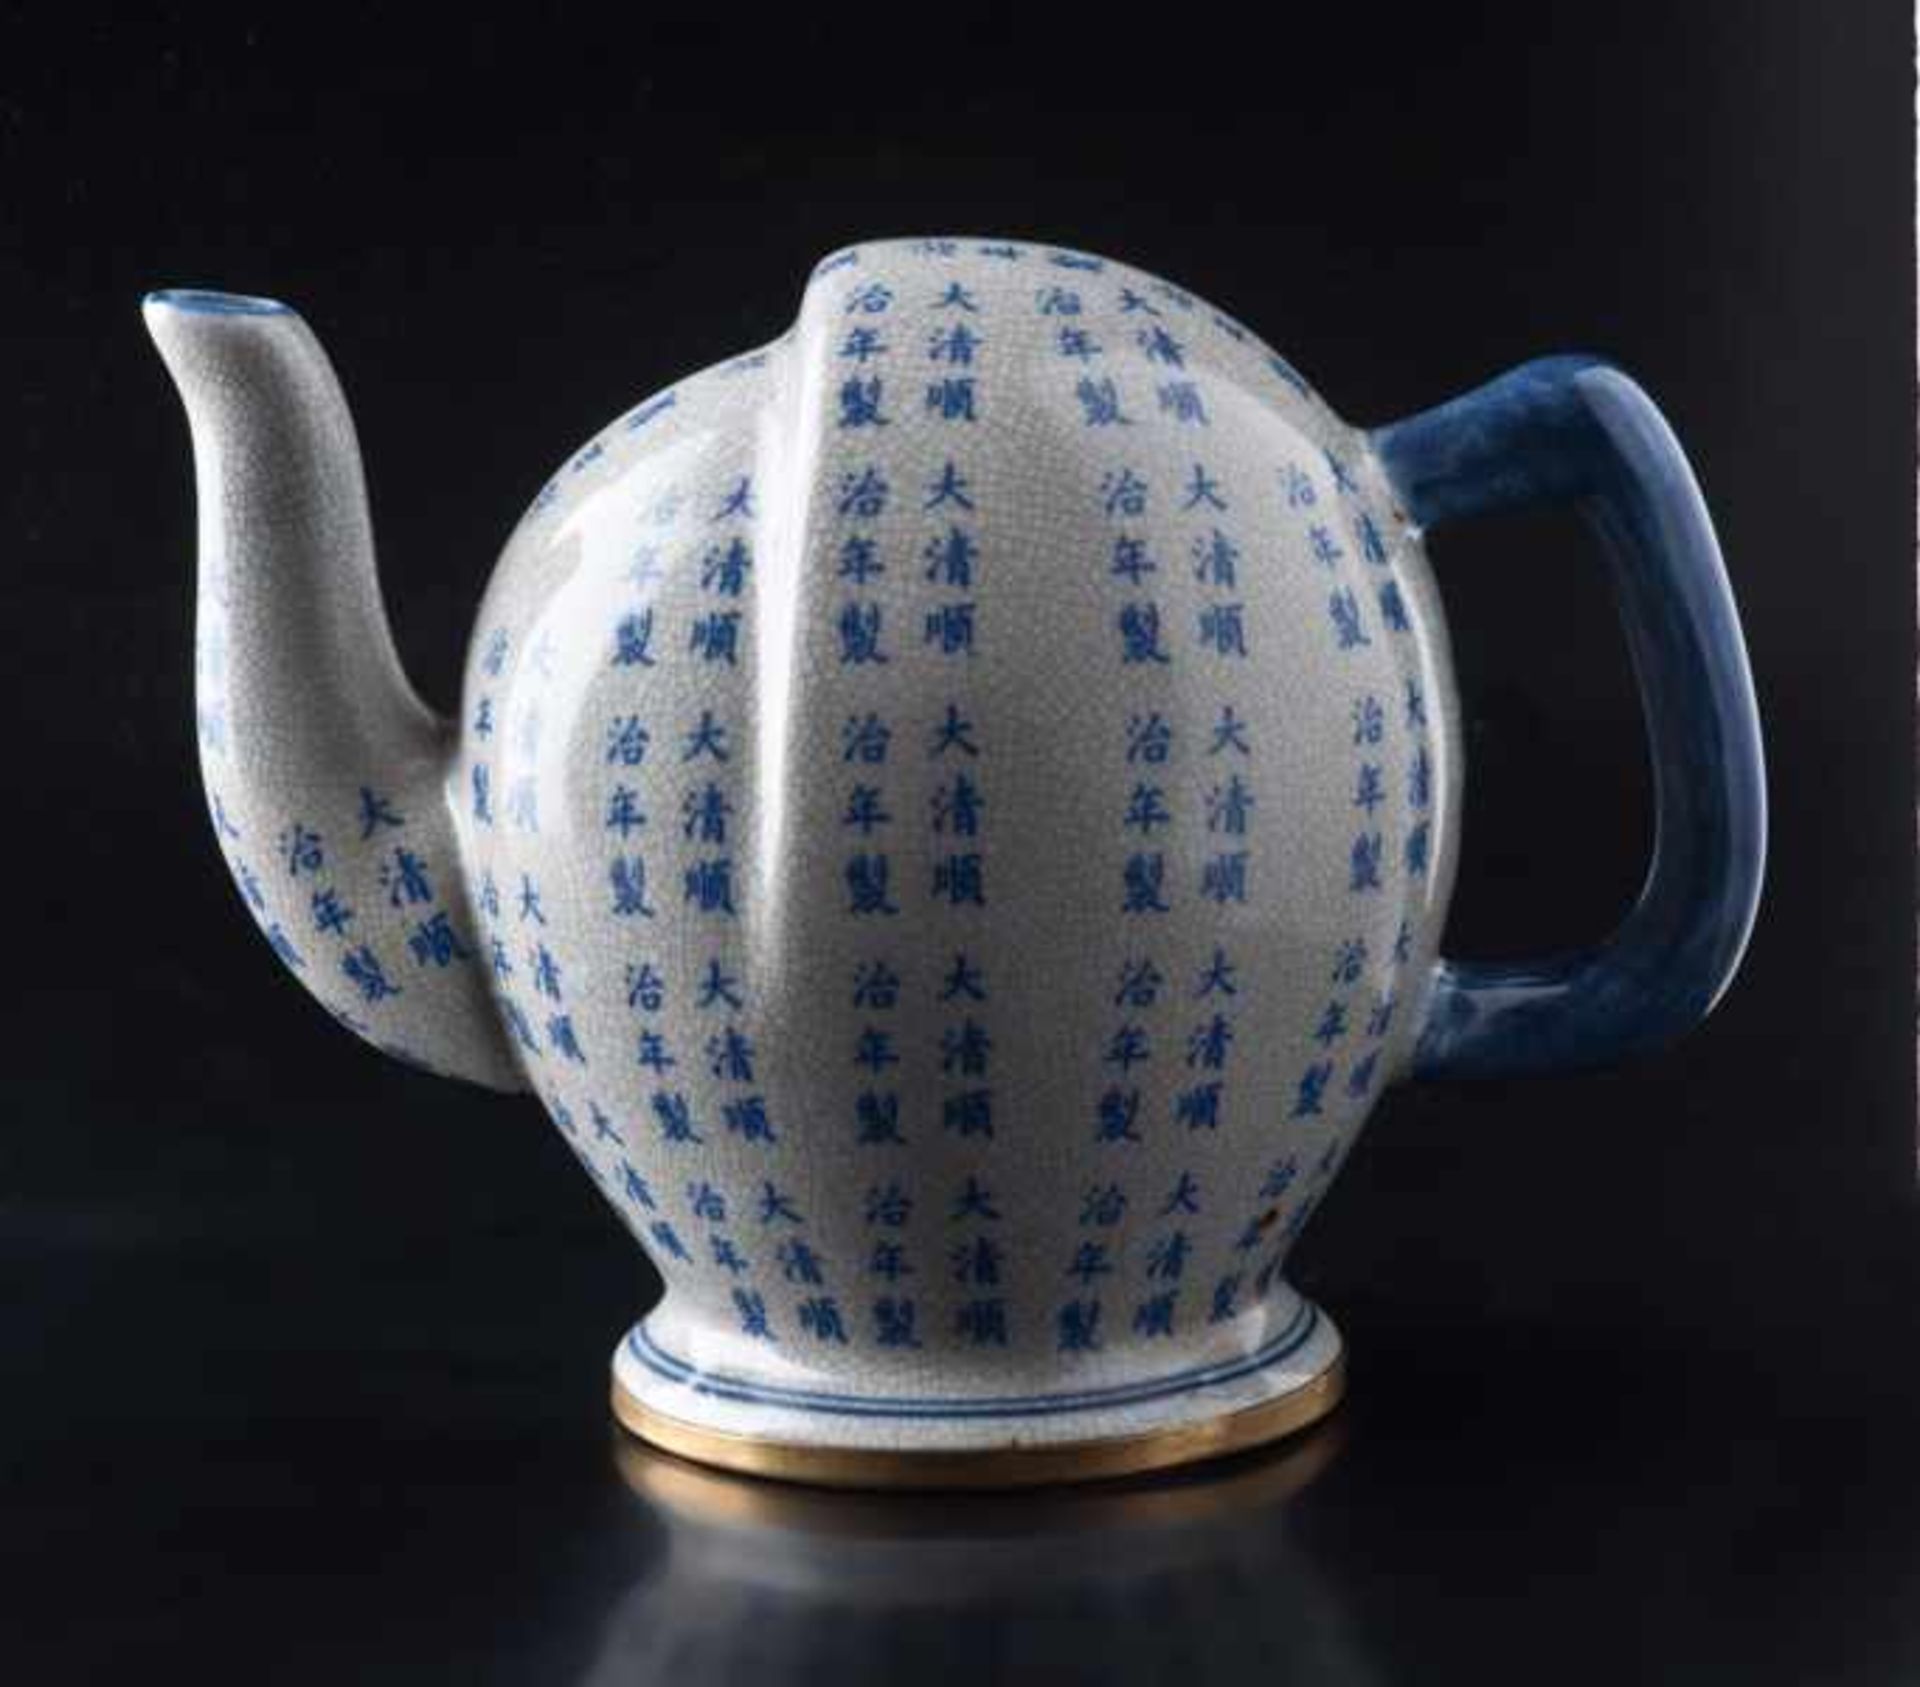 TEAPOT WITH CHINESE CHARACTERS Glazed ceramic and metal. China or Japan, 19th cent. to first half of